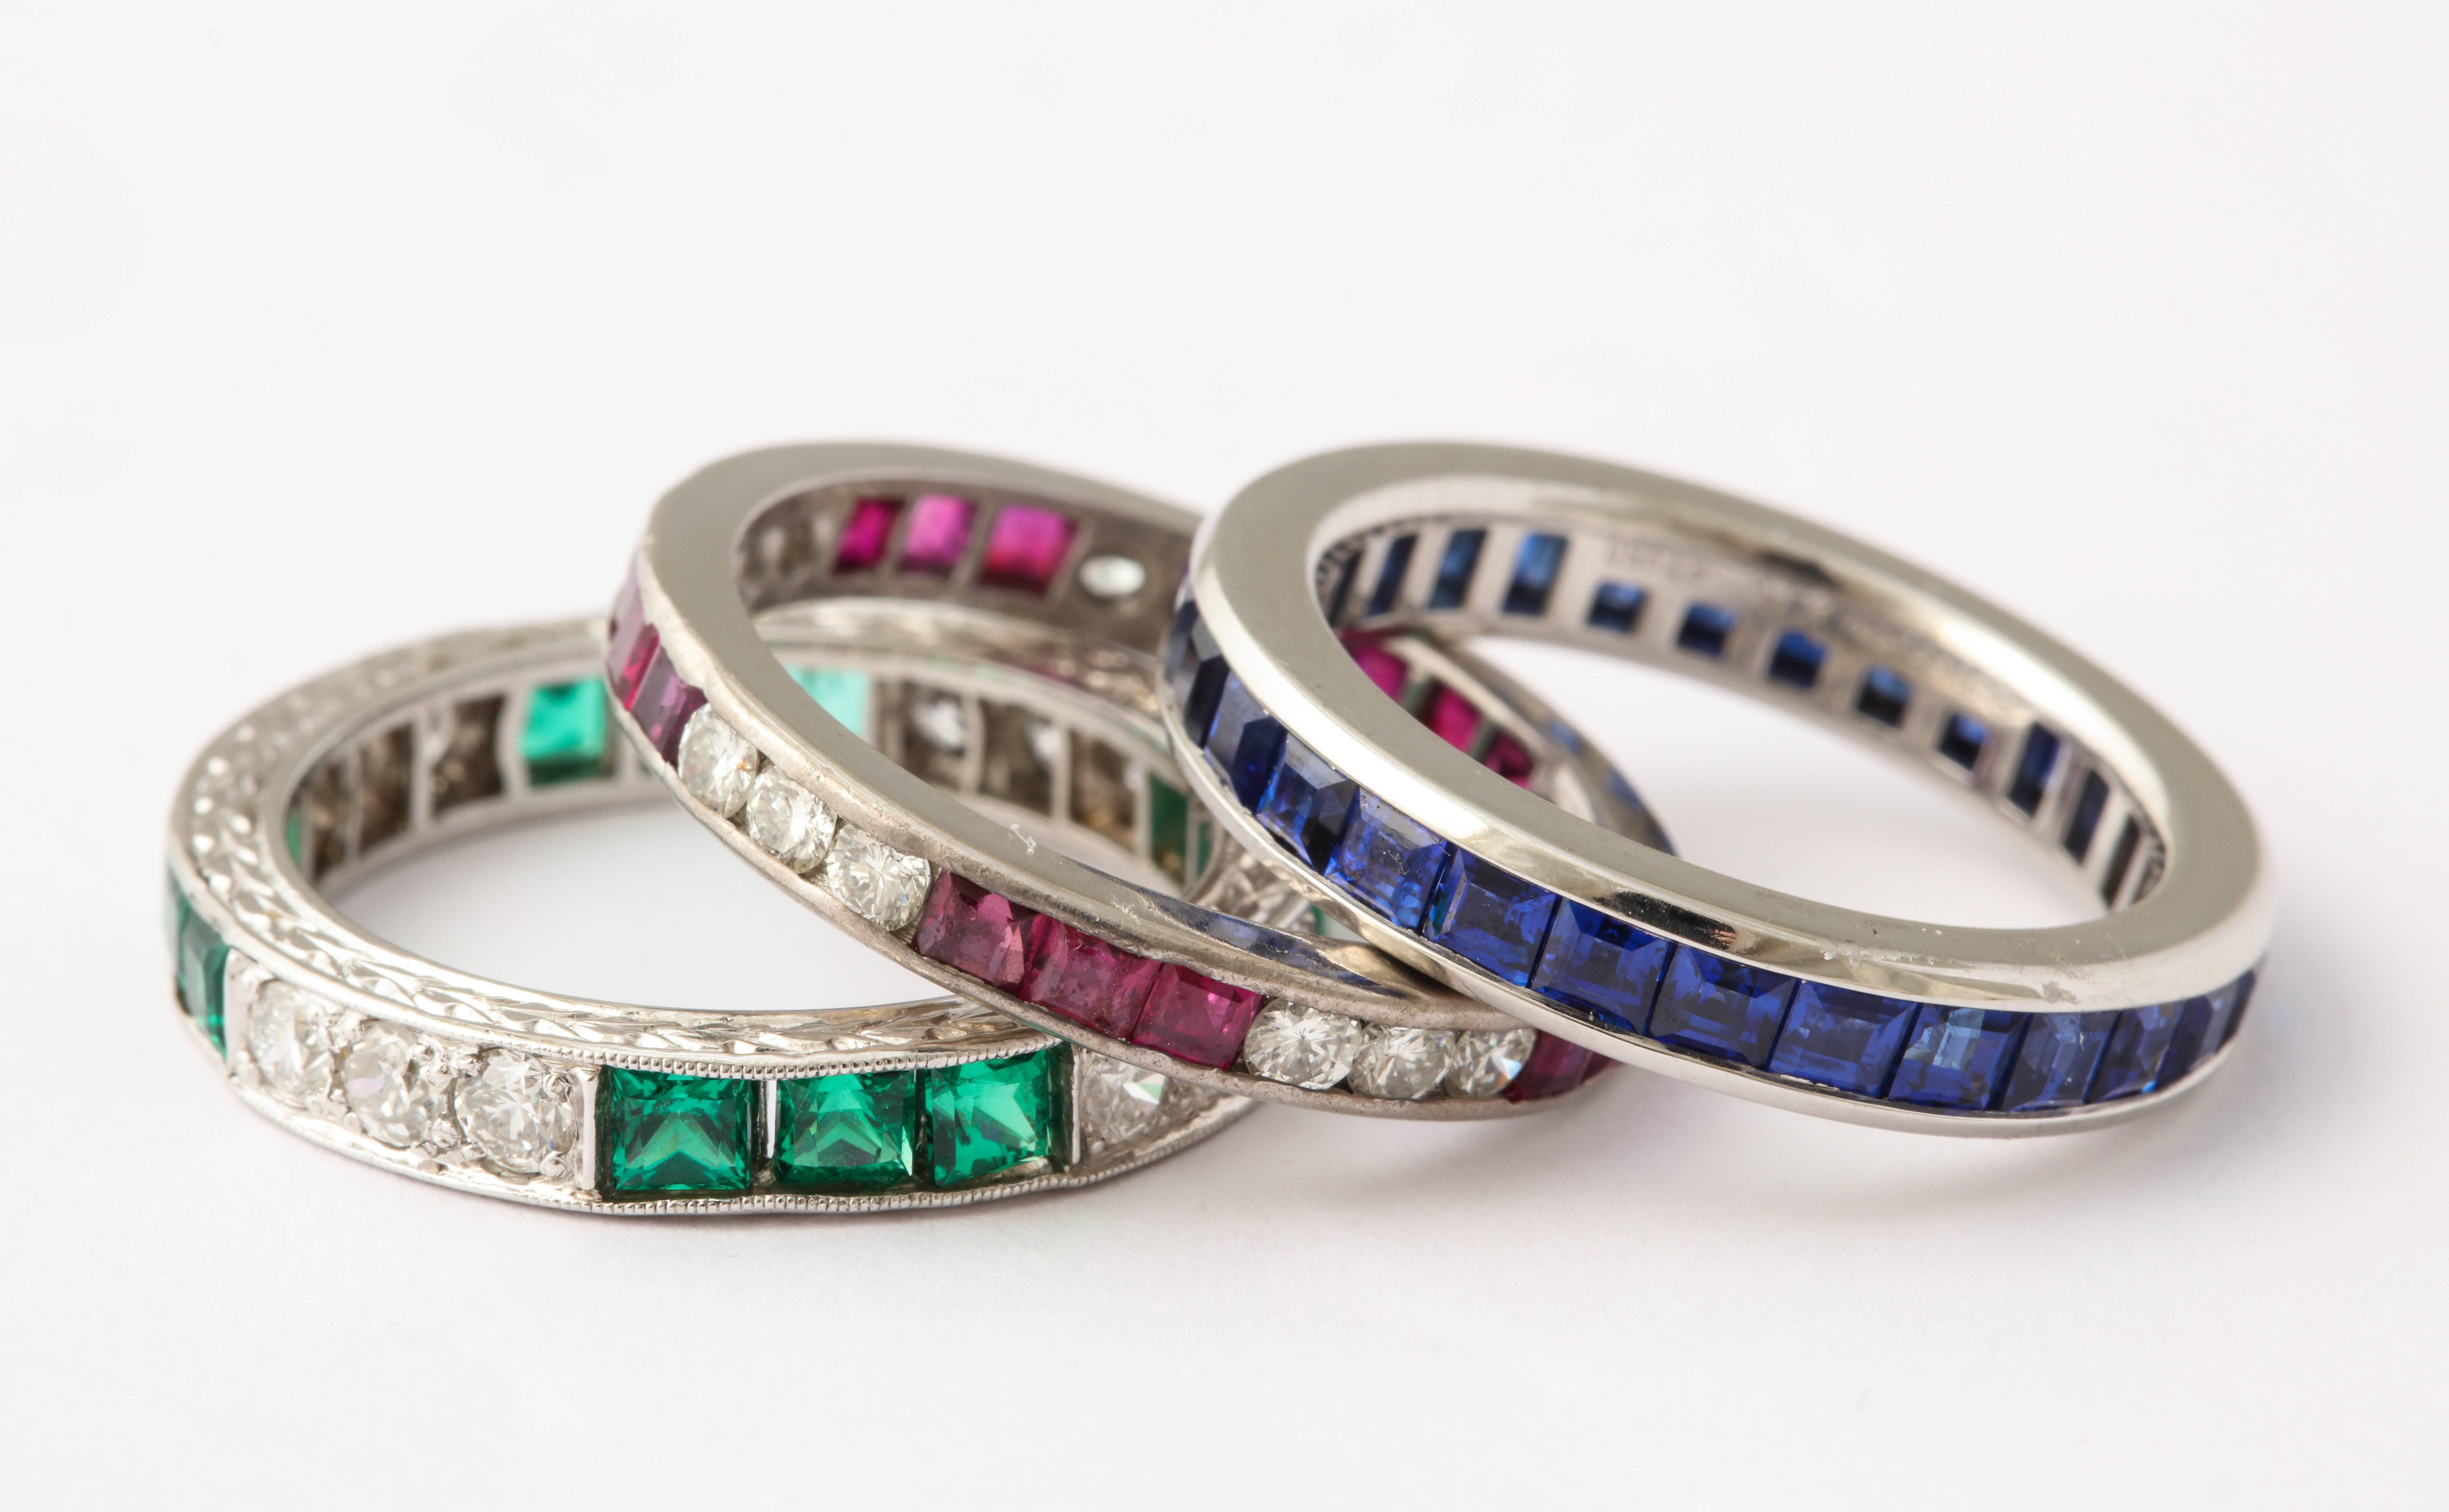 A great collection of various wedding bands set in platinum individually available.
 Tiffany and Co sapphires set in platinum ring size 5.5 $3800.  Emeralds and diamonds set in platinum size 6.25 $3,200. Rubies and diamonds set in platinum ring size